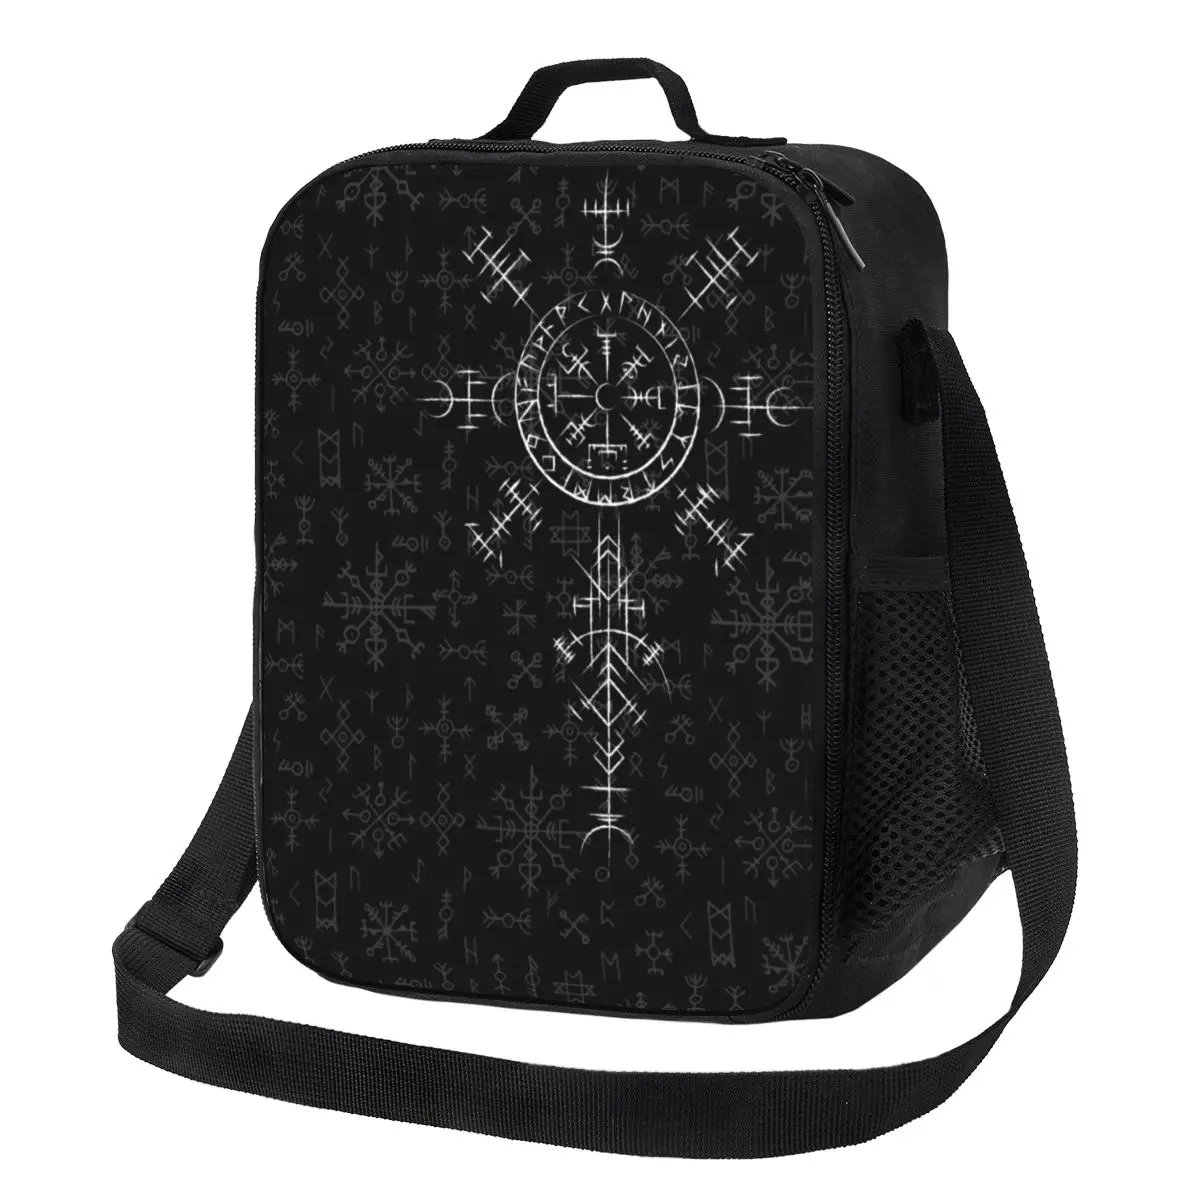 

Lucky Charm Viking Compass Vegvisir Insulated Lunch Tote Bag for Vikings Valhalla Resuable Thermal Cooler Food Bento Box Work